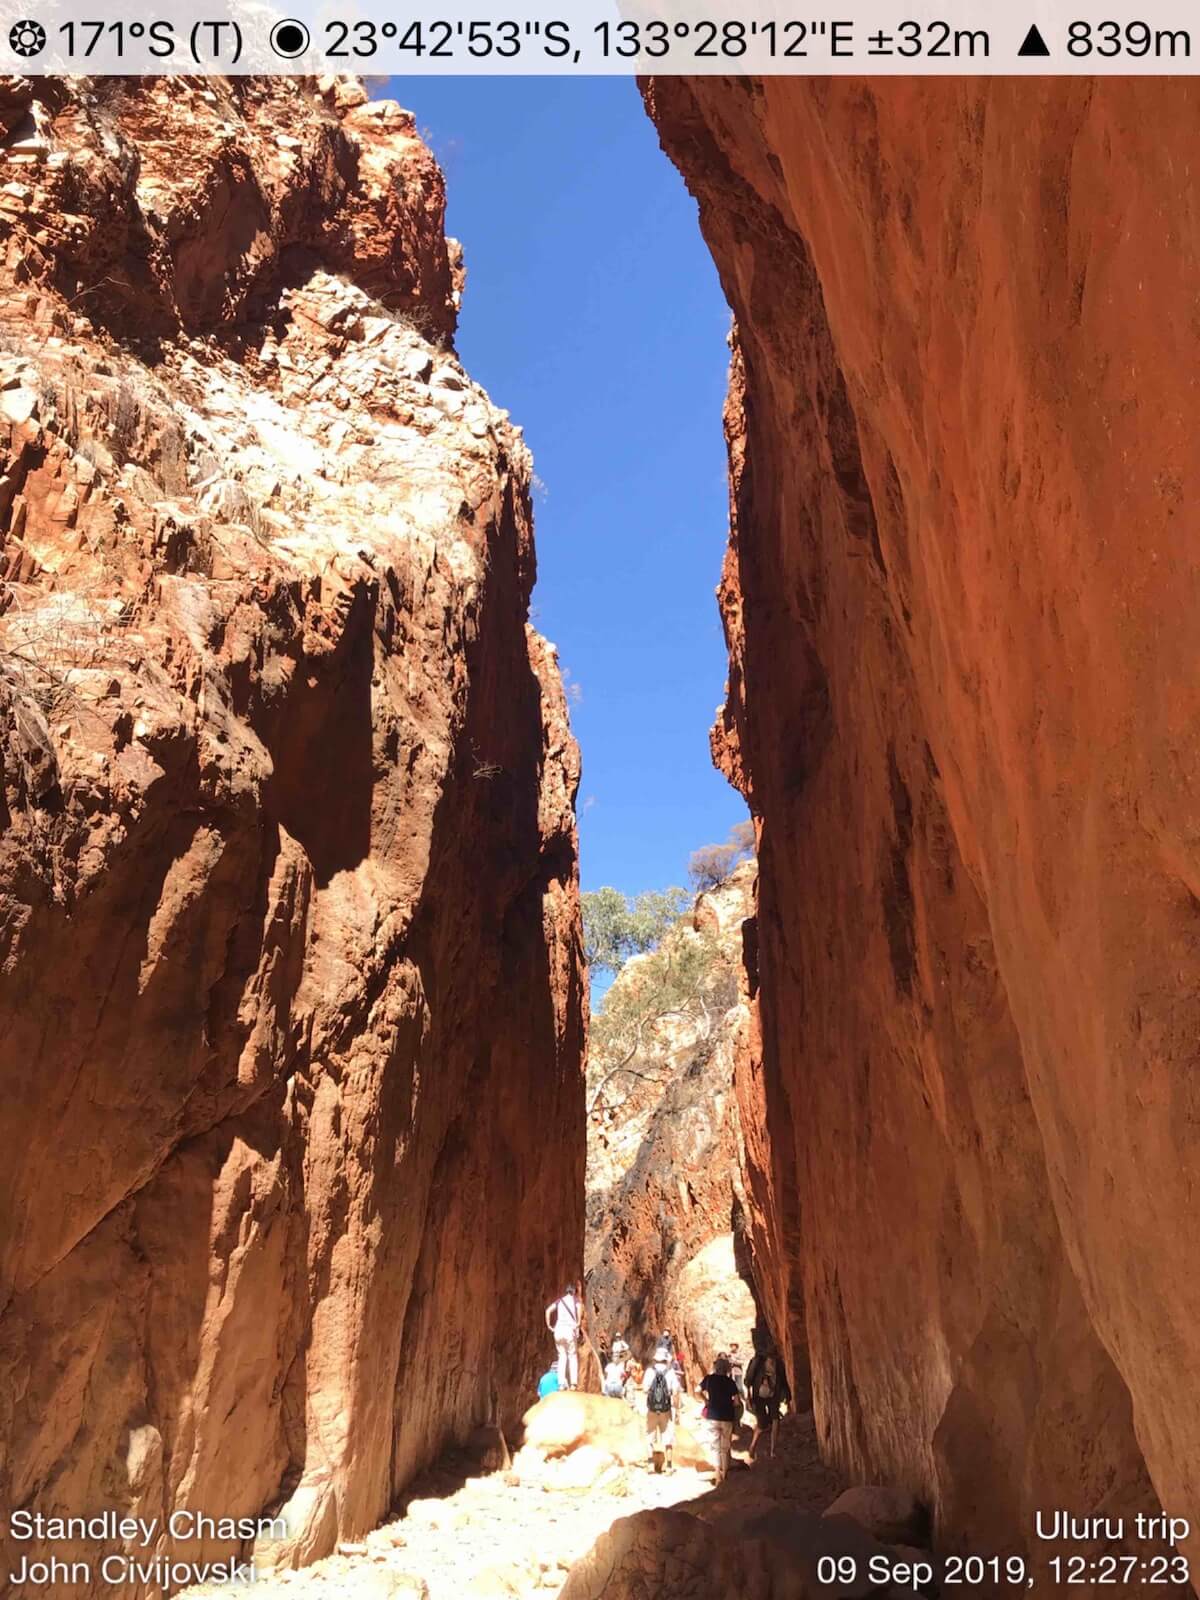 Tourists at Standley Chasm NT Australia.